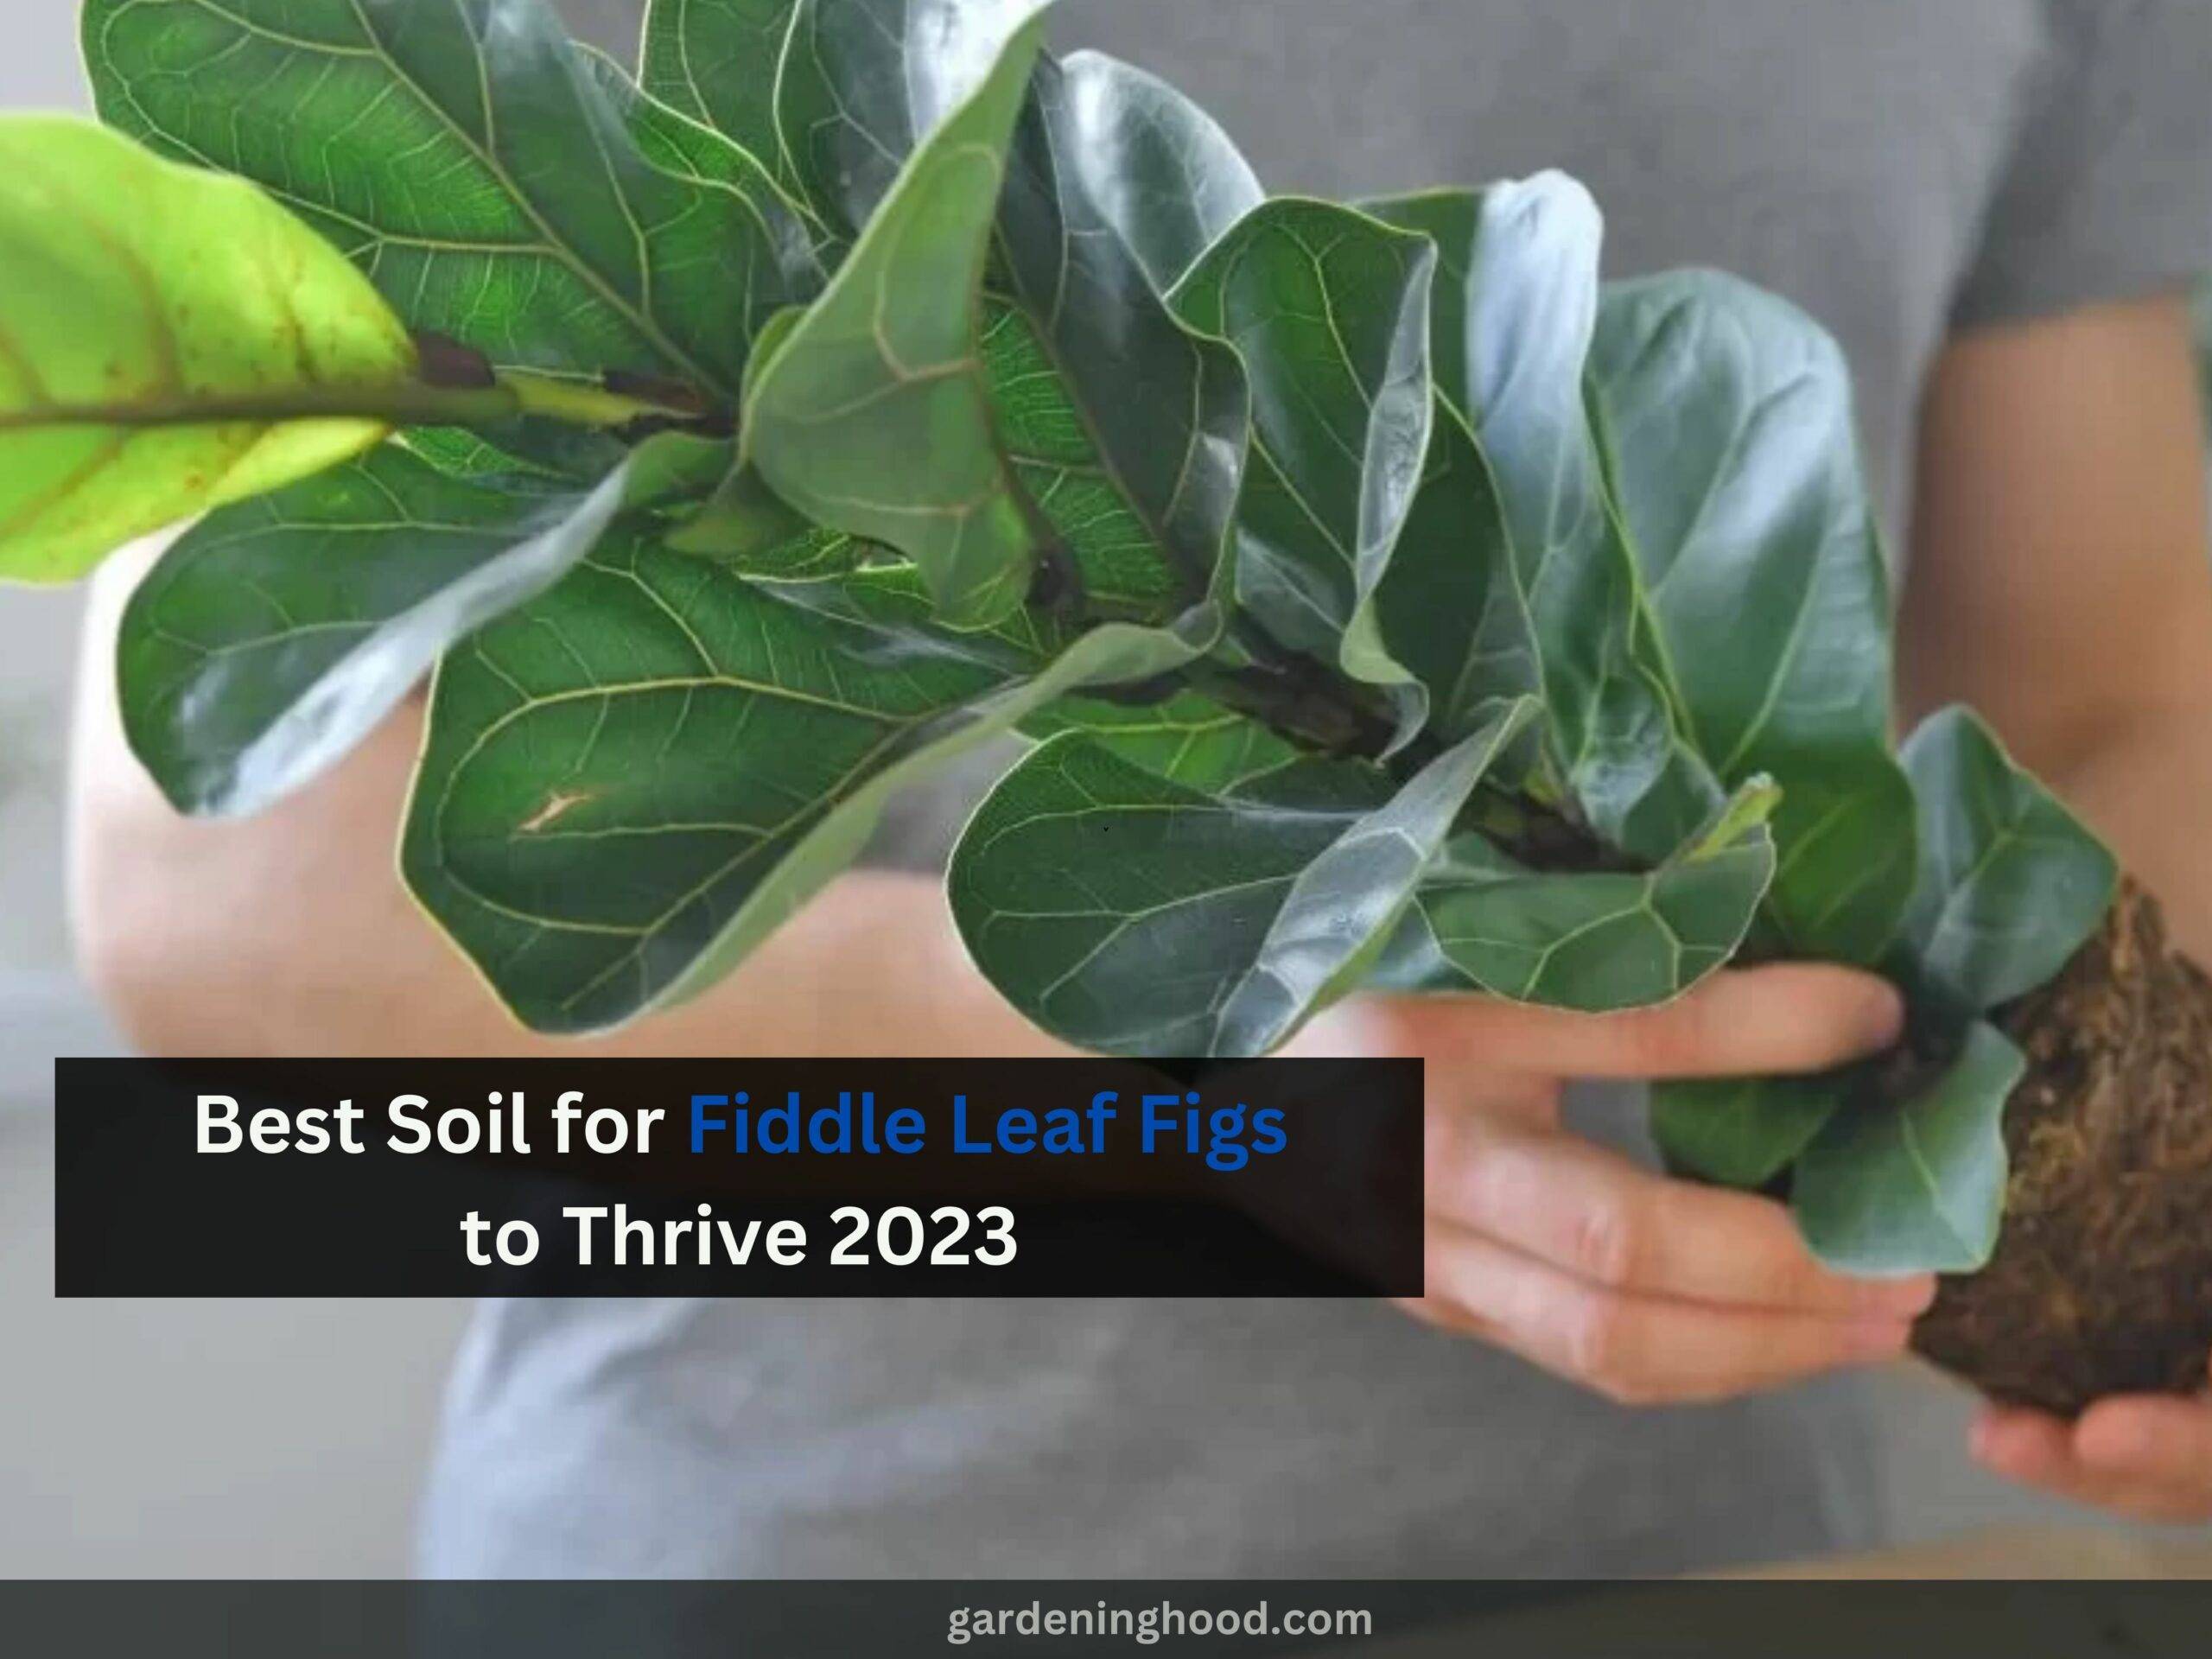 Best Soil for Fiddle Leaf Figs to Thrive 2023